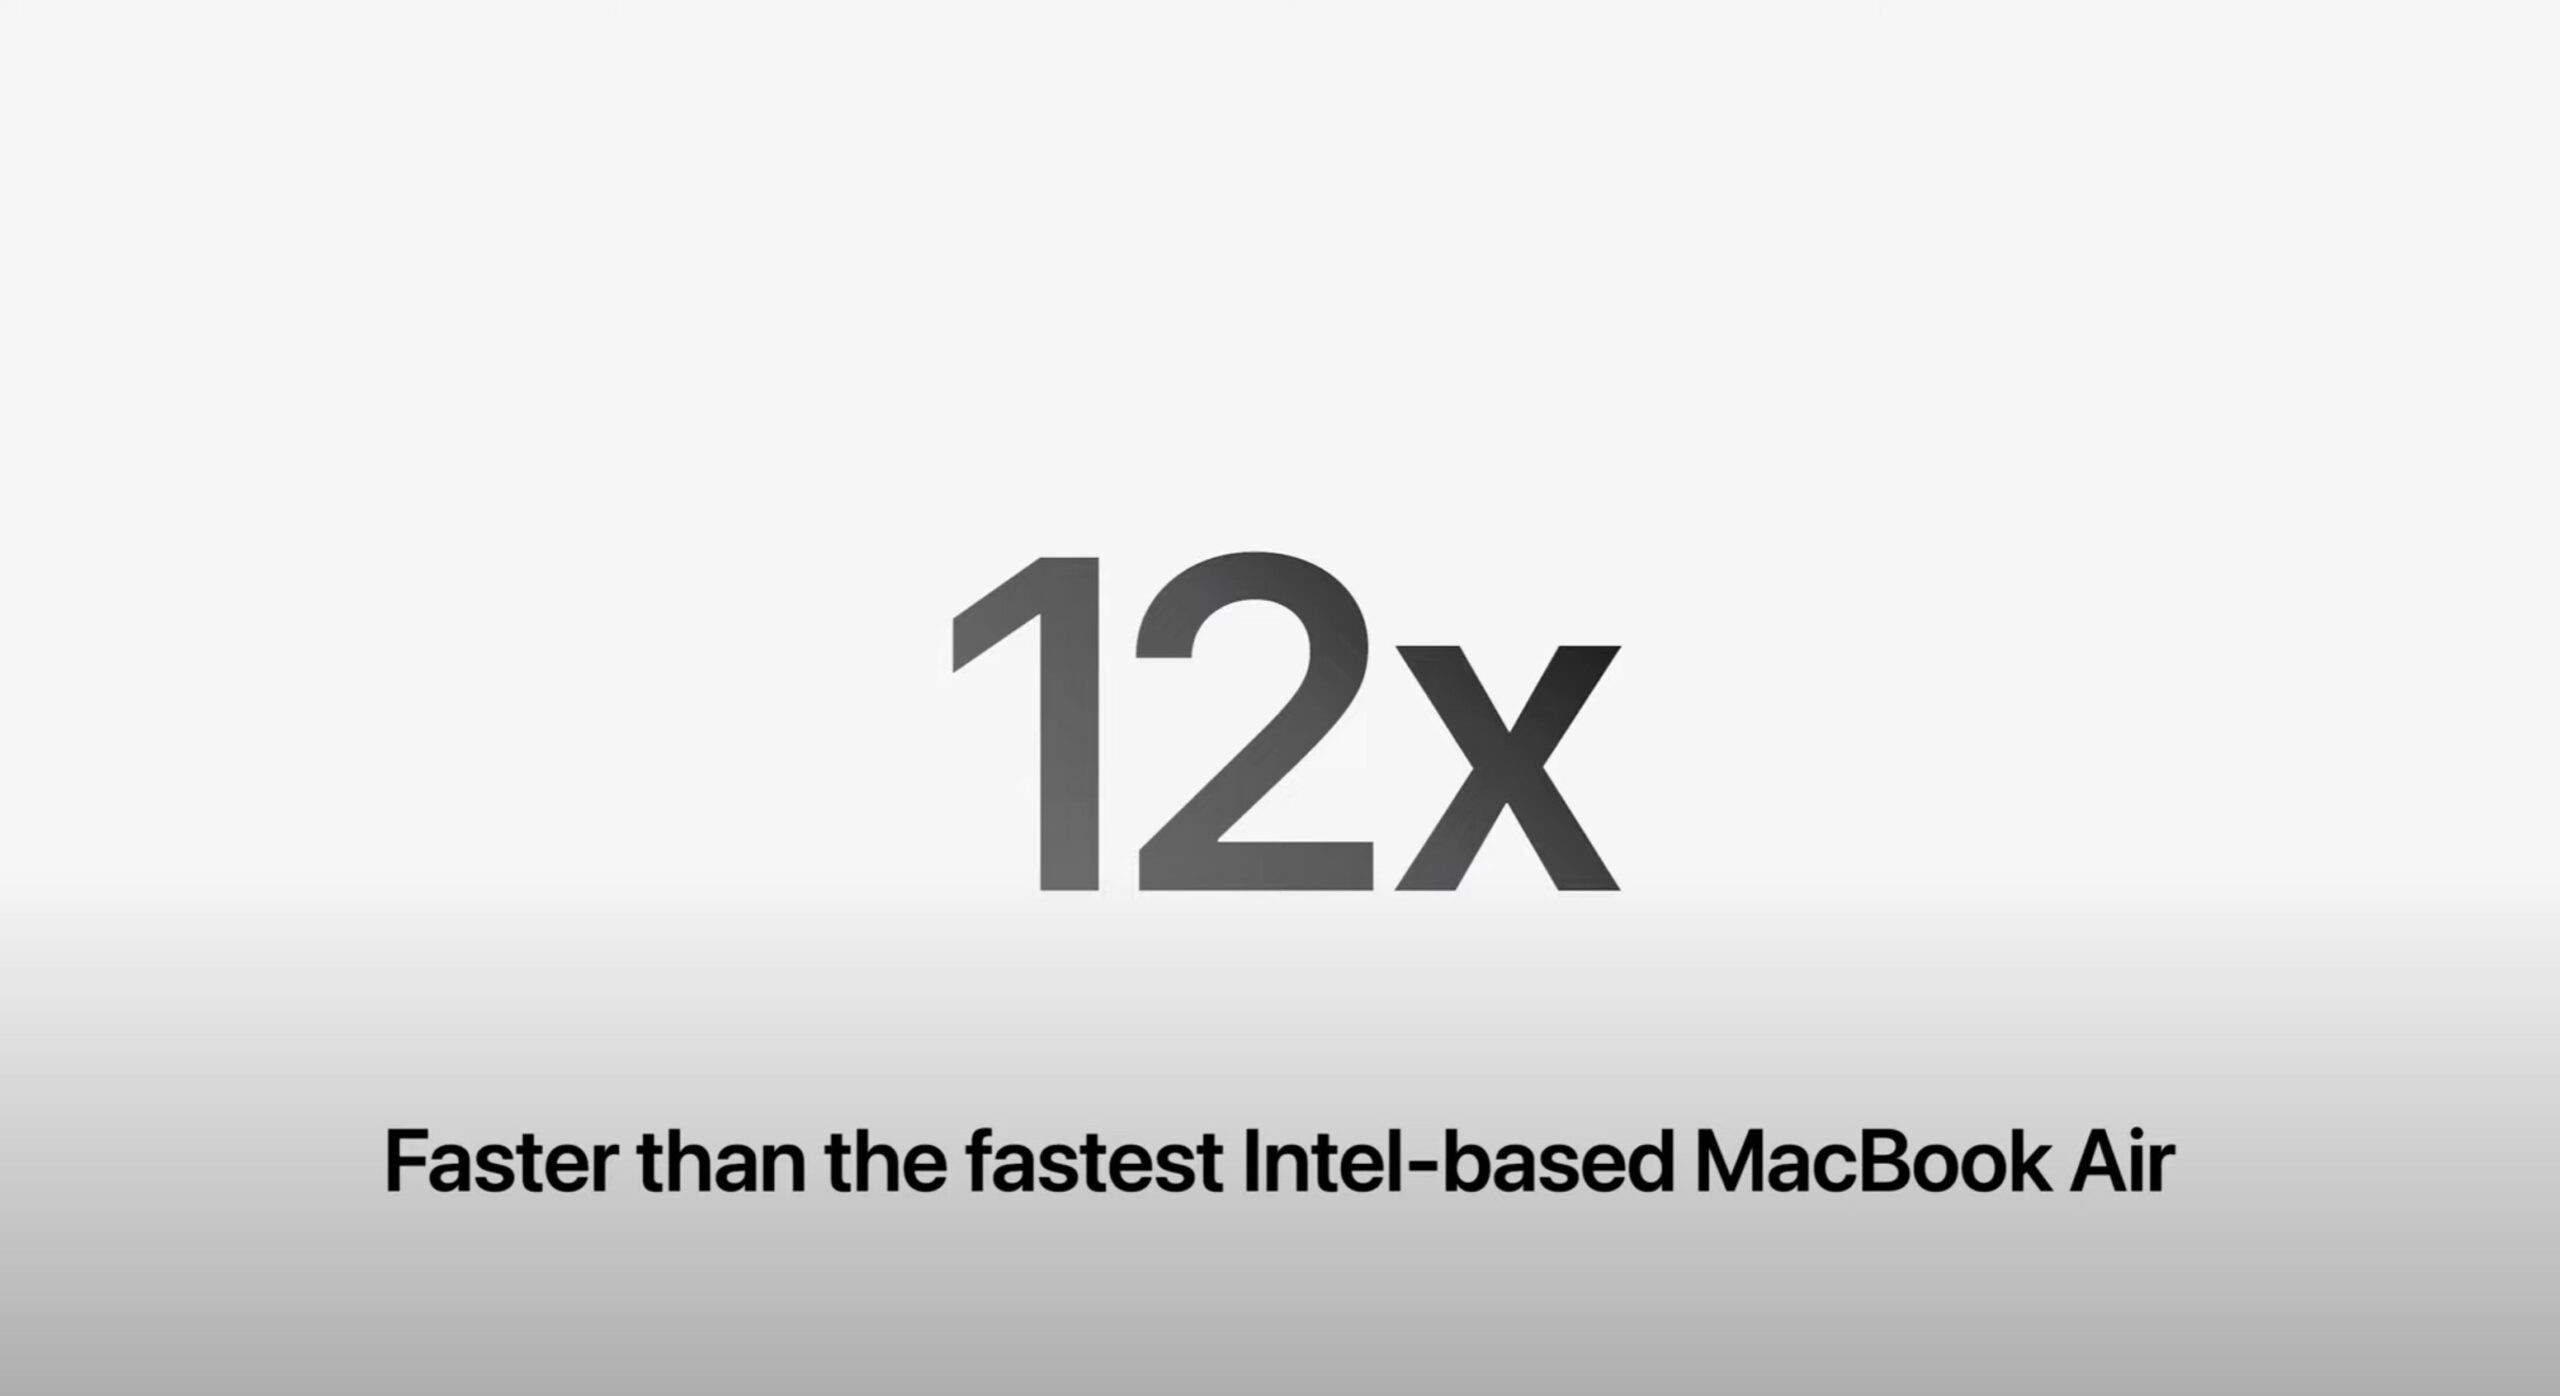 MacBook Air: Fact-checking Apple's WWDC performance claims